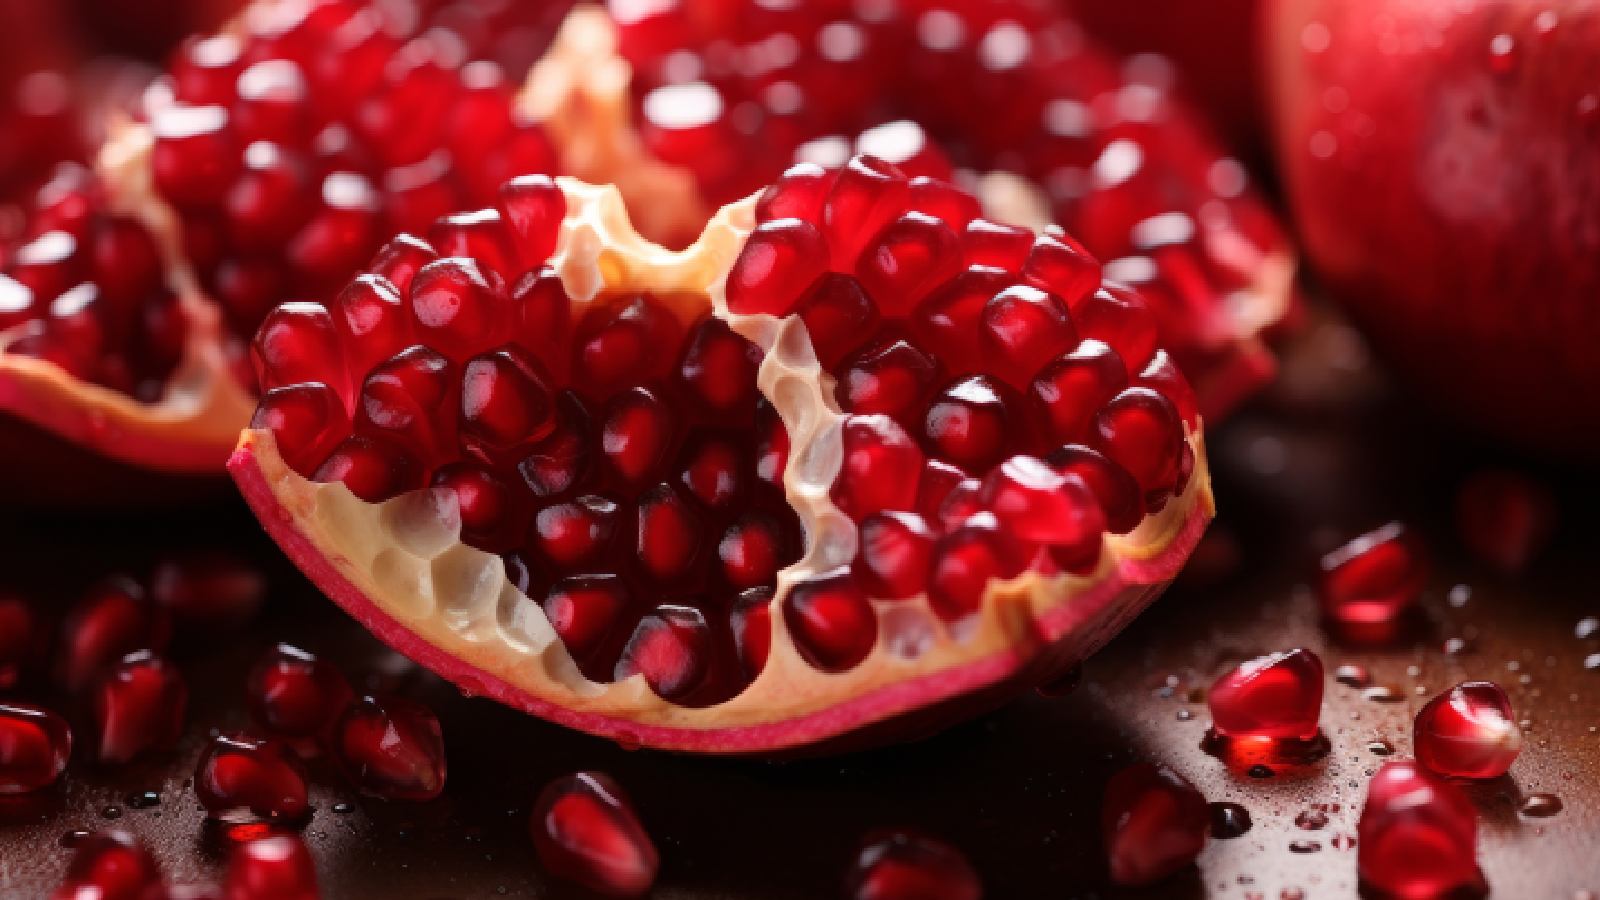 Pomegranate peels: Know health benefits and how to use them